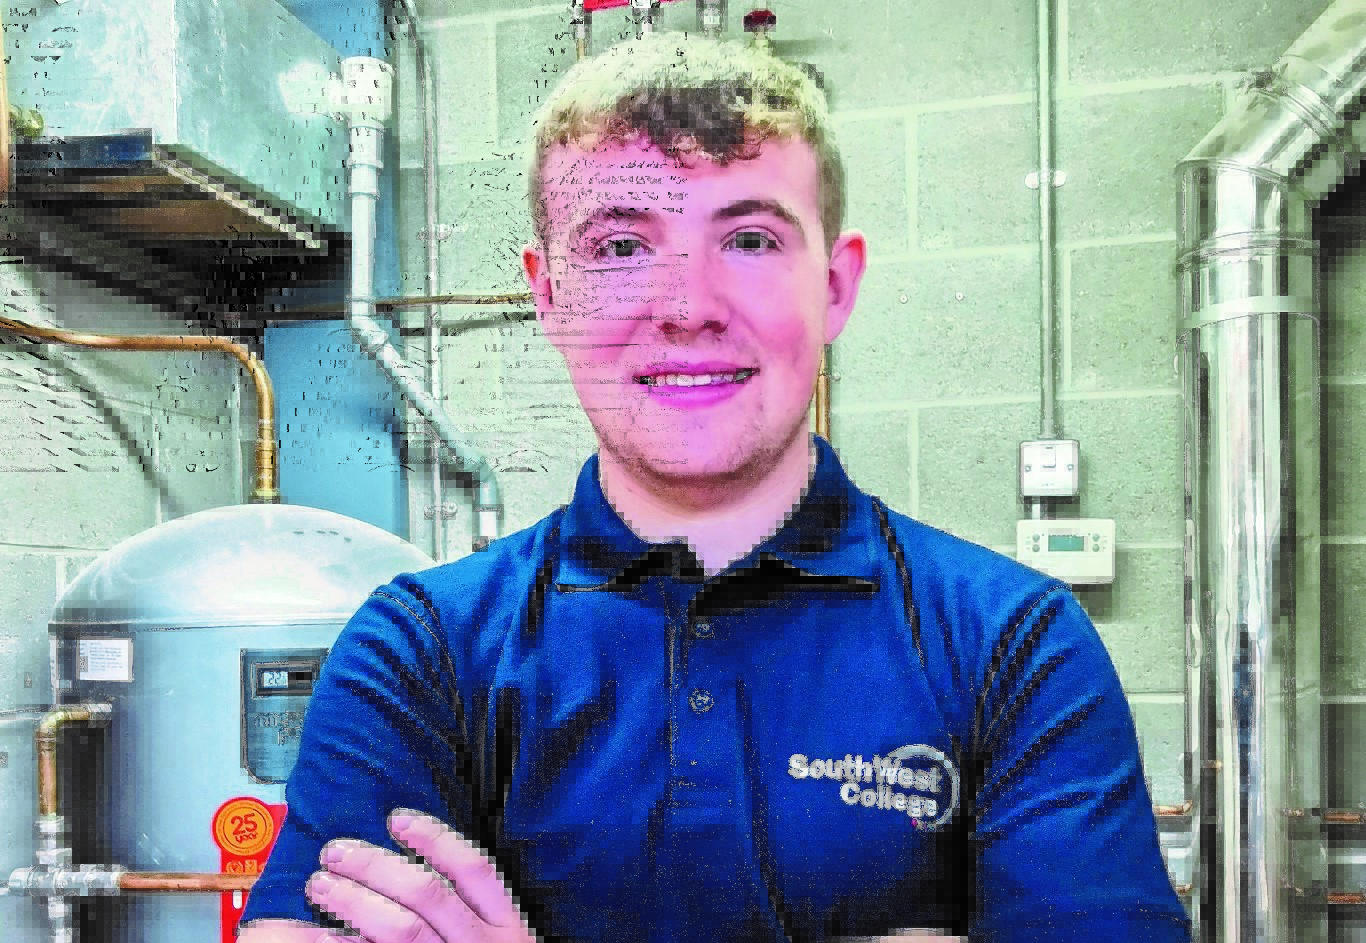 Aughnacloy plumbing apprentice is selected for WorldSkills UK squad